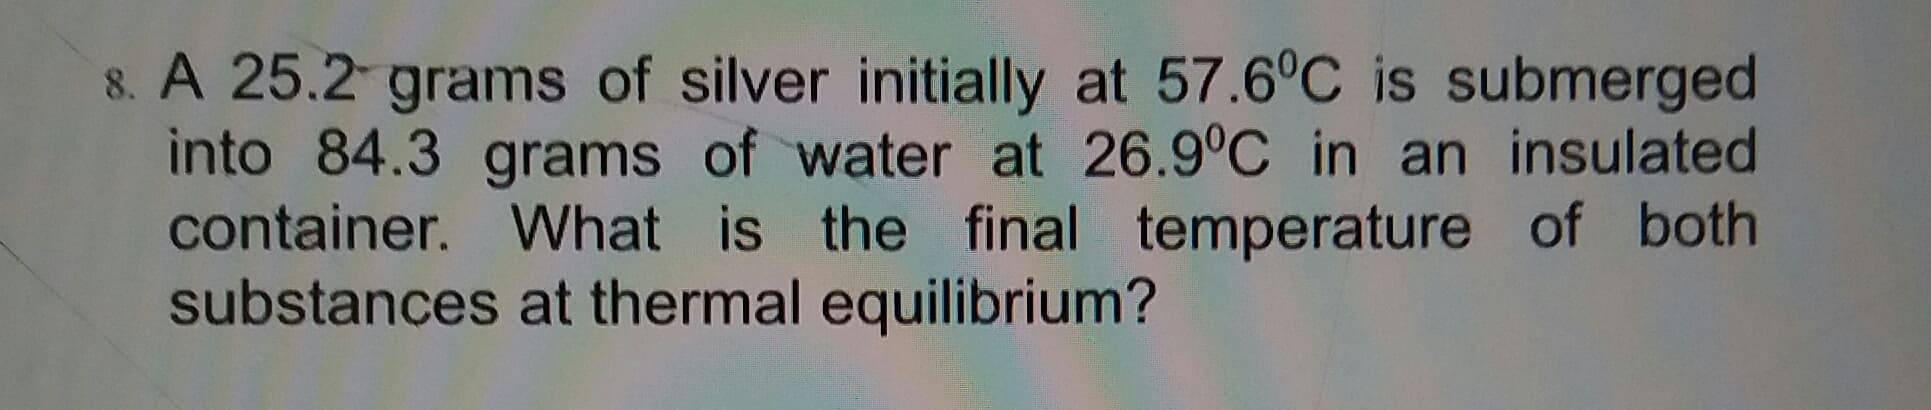 8. A 25.2 grams of silver initially at 57.6°C is submerged
into 84.3 grams of water at 26.9°C in an insulated
container. What is the final temperature of both
substances at thermal equilibrium?
